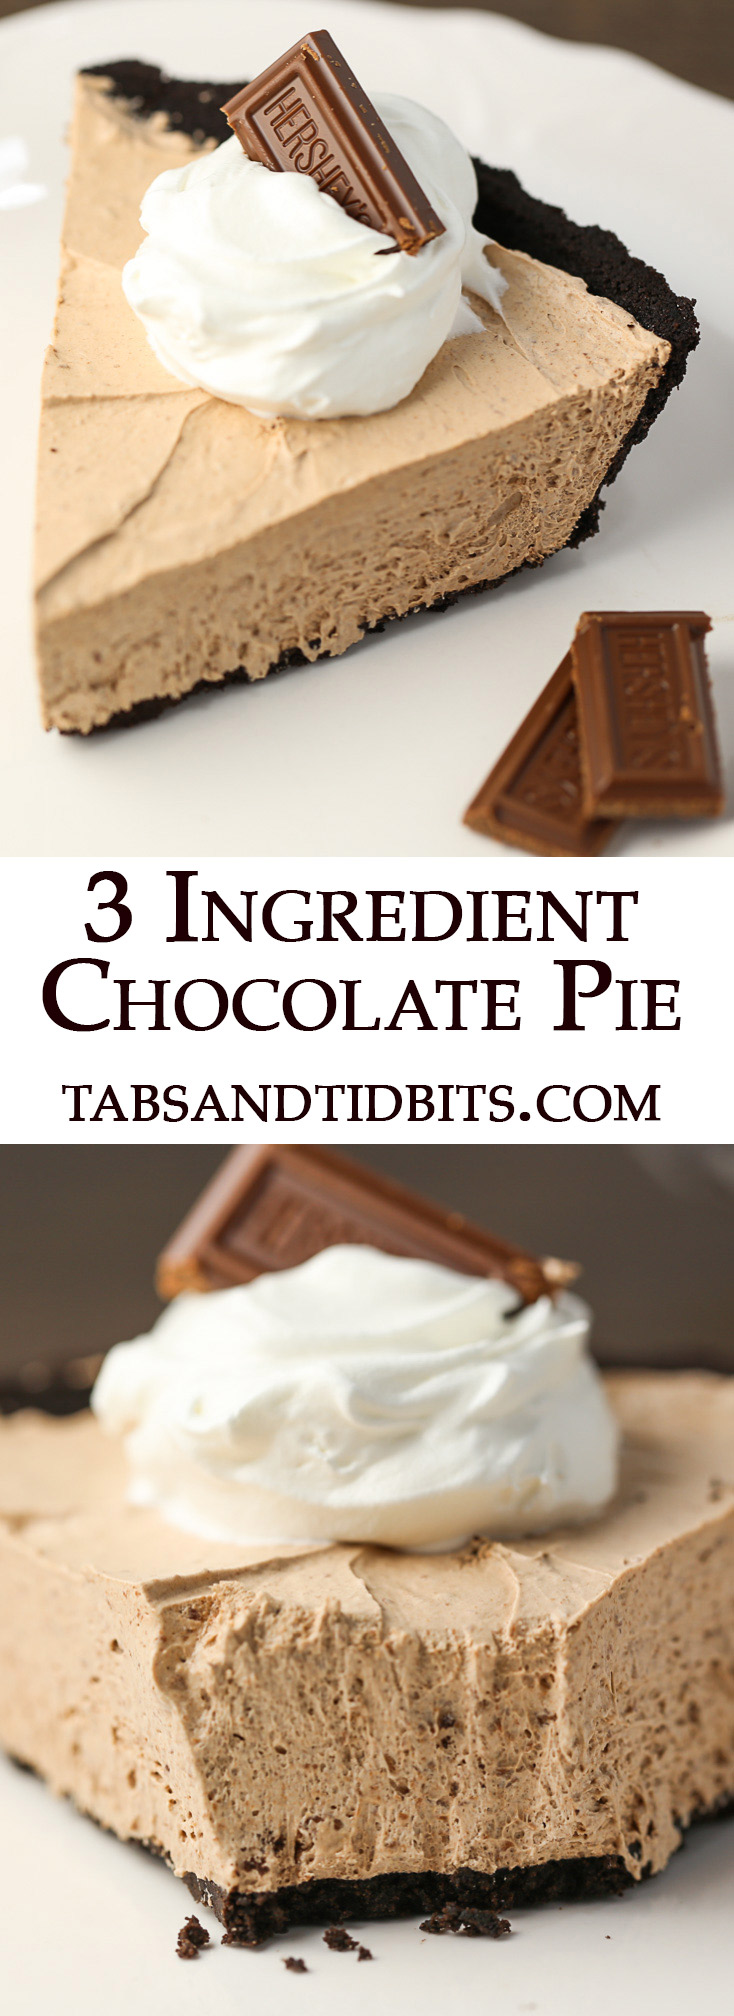 This 3 Ingredient Chocolate Pie is an oldie but a goodie! Melted chocolate and whipped topping are mixed together in a chocolate cookie pie crust!